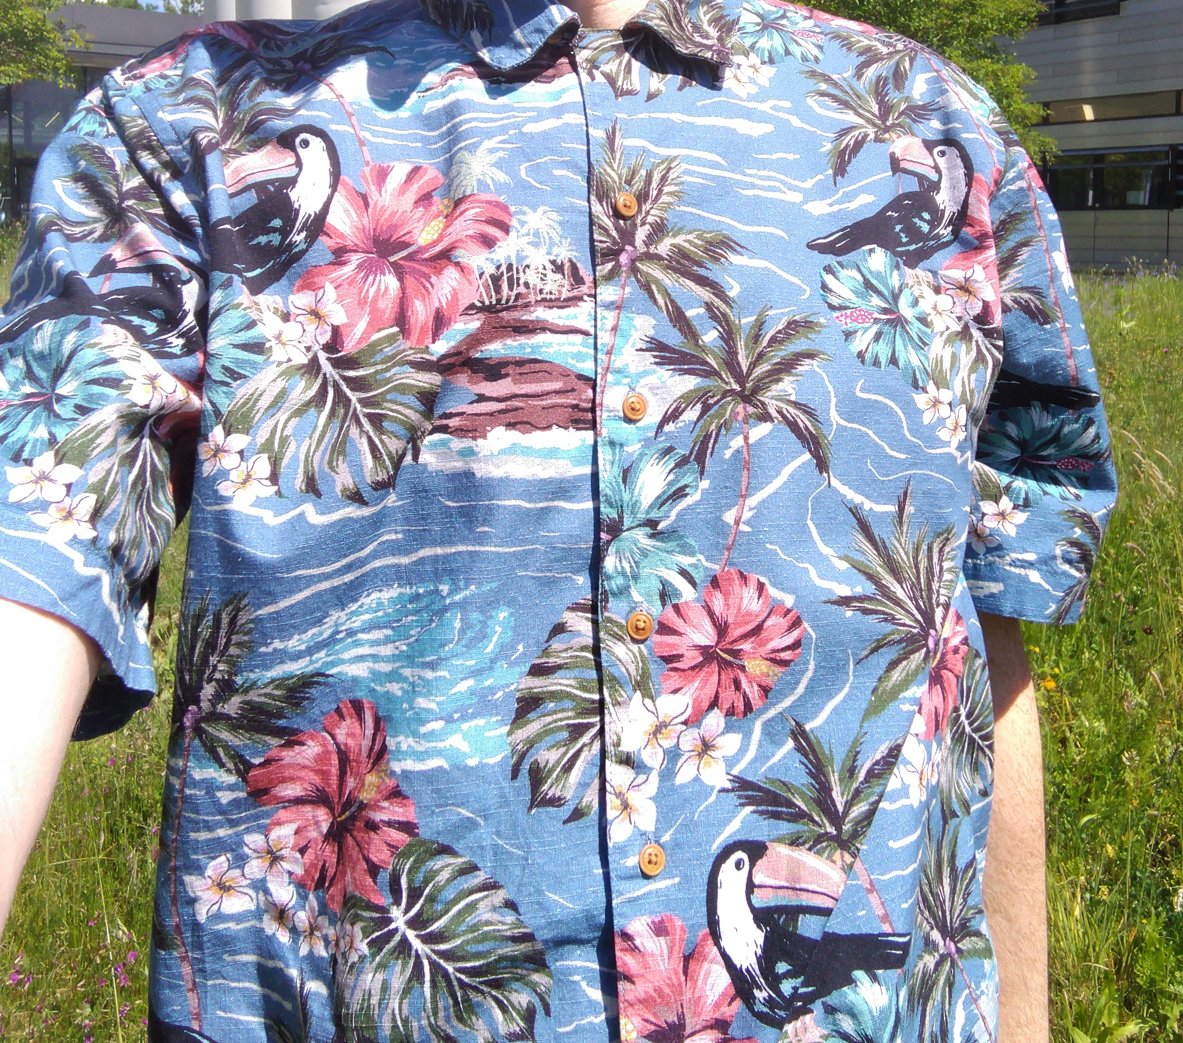 I did not make it to #chi2024. To make up for missing out I'll be wearing Hawaii shirts all week.